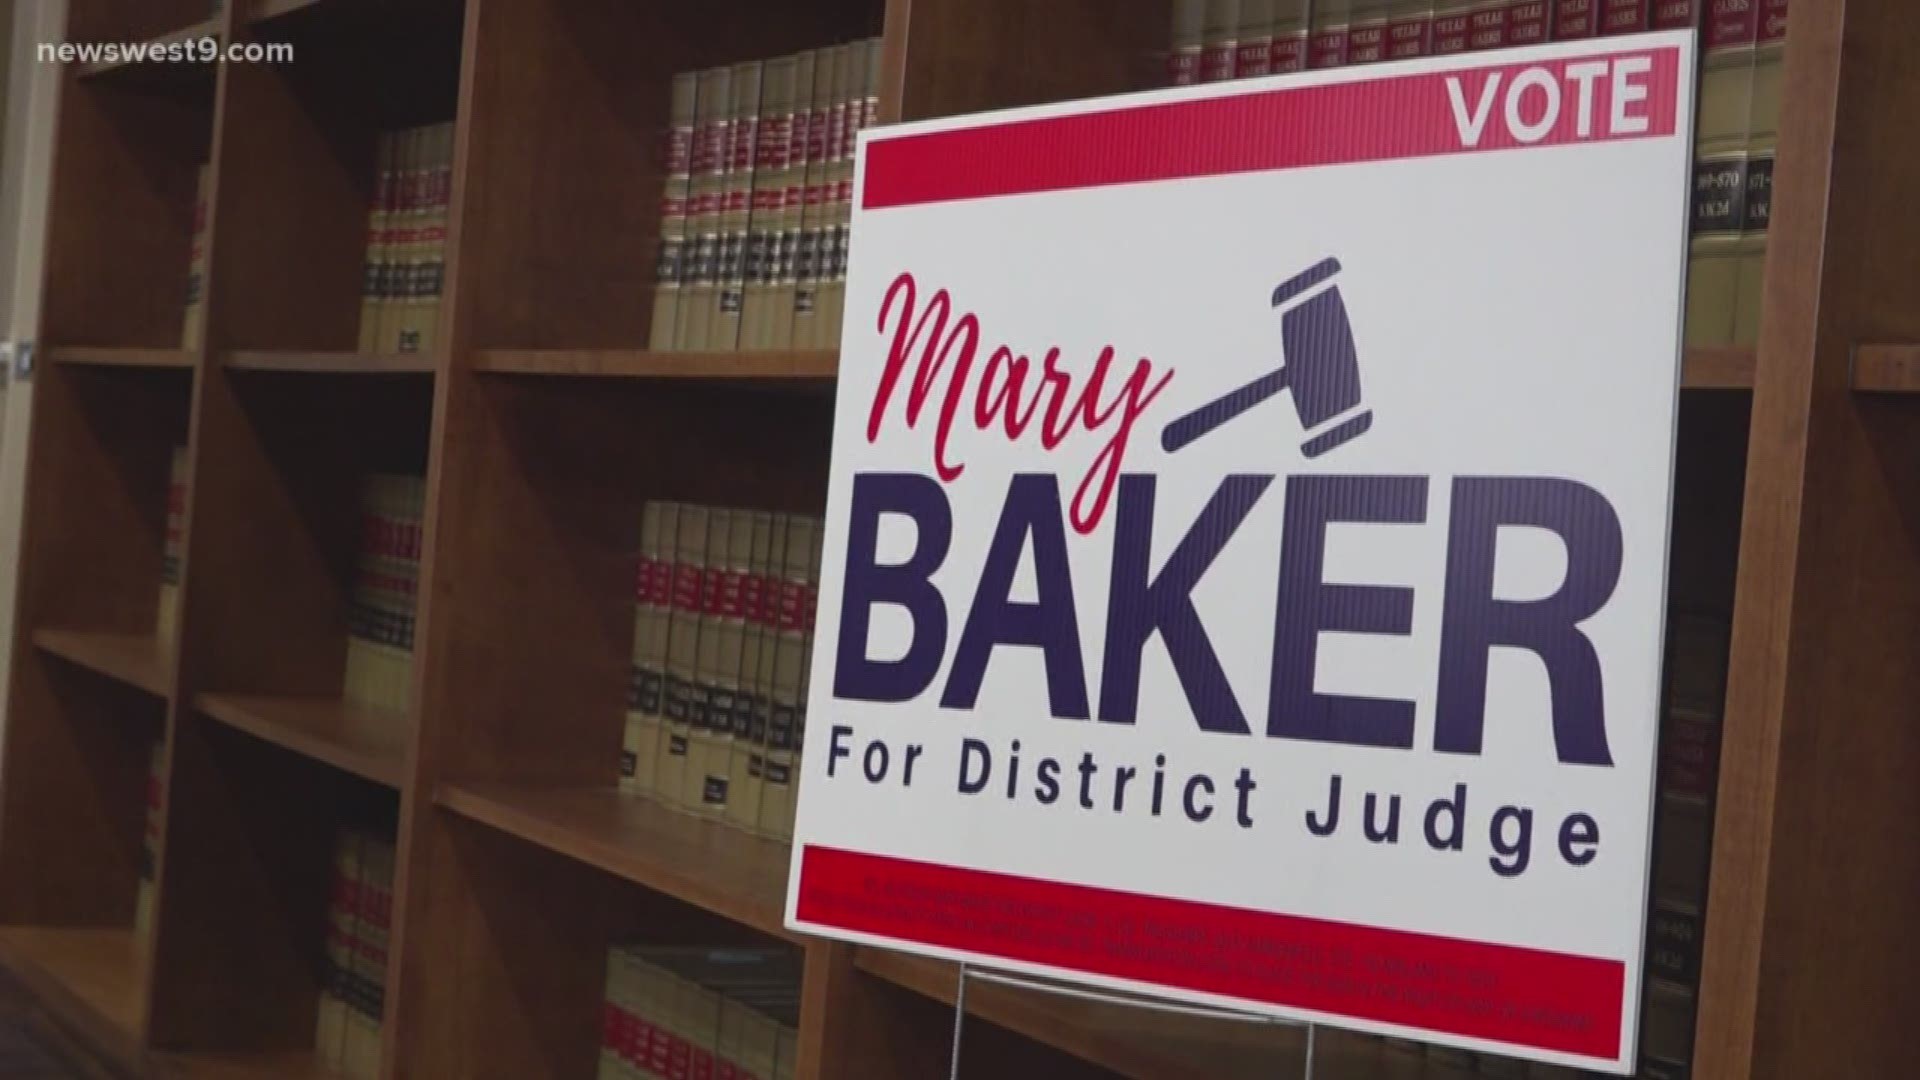 Baker has eight years of experience in the oil and gas industry and she hopes this will bring a balance to this district.